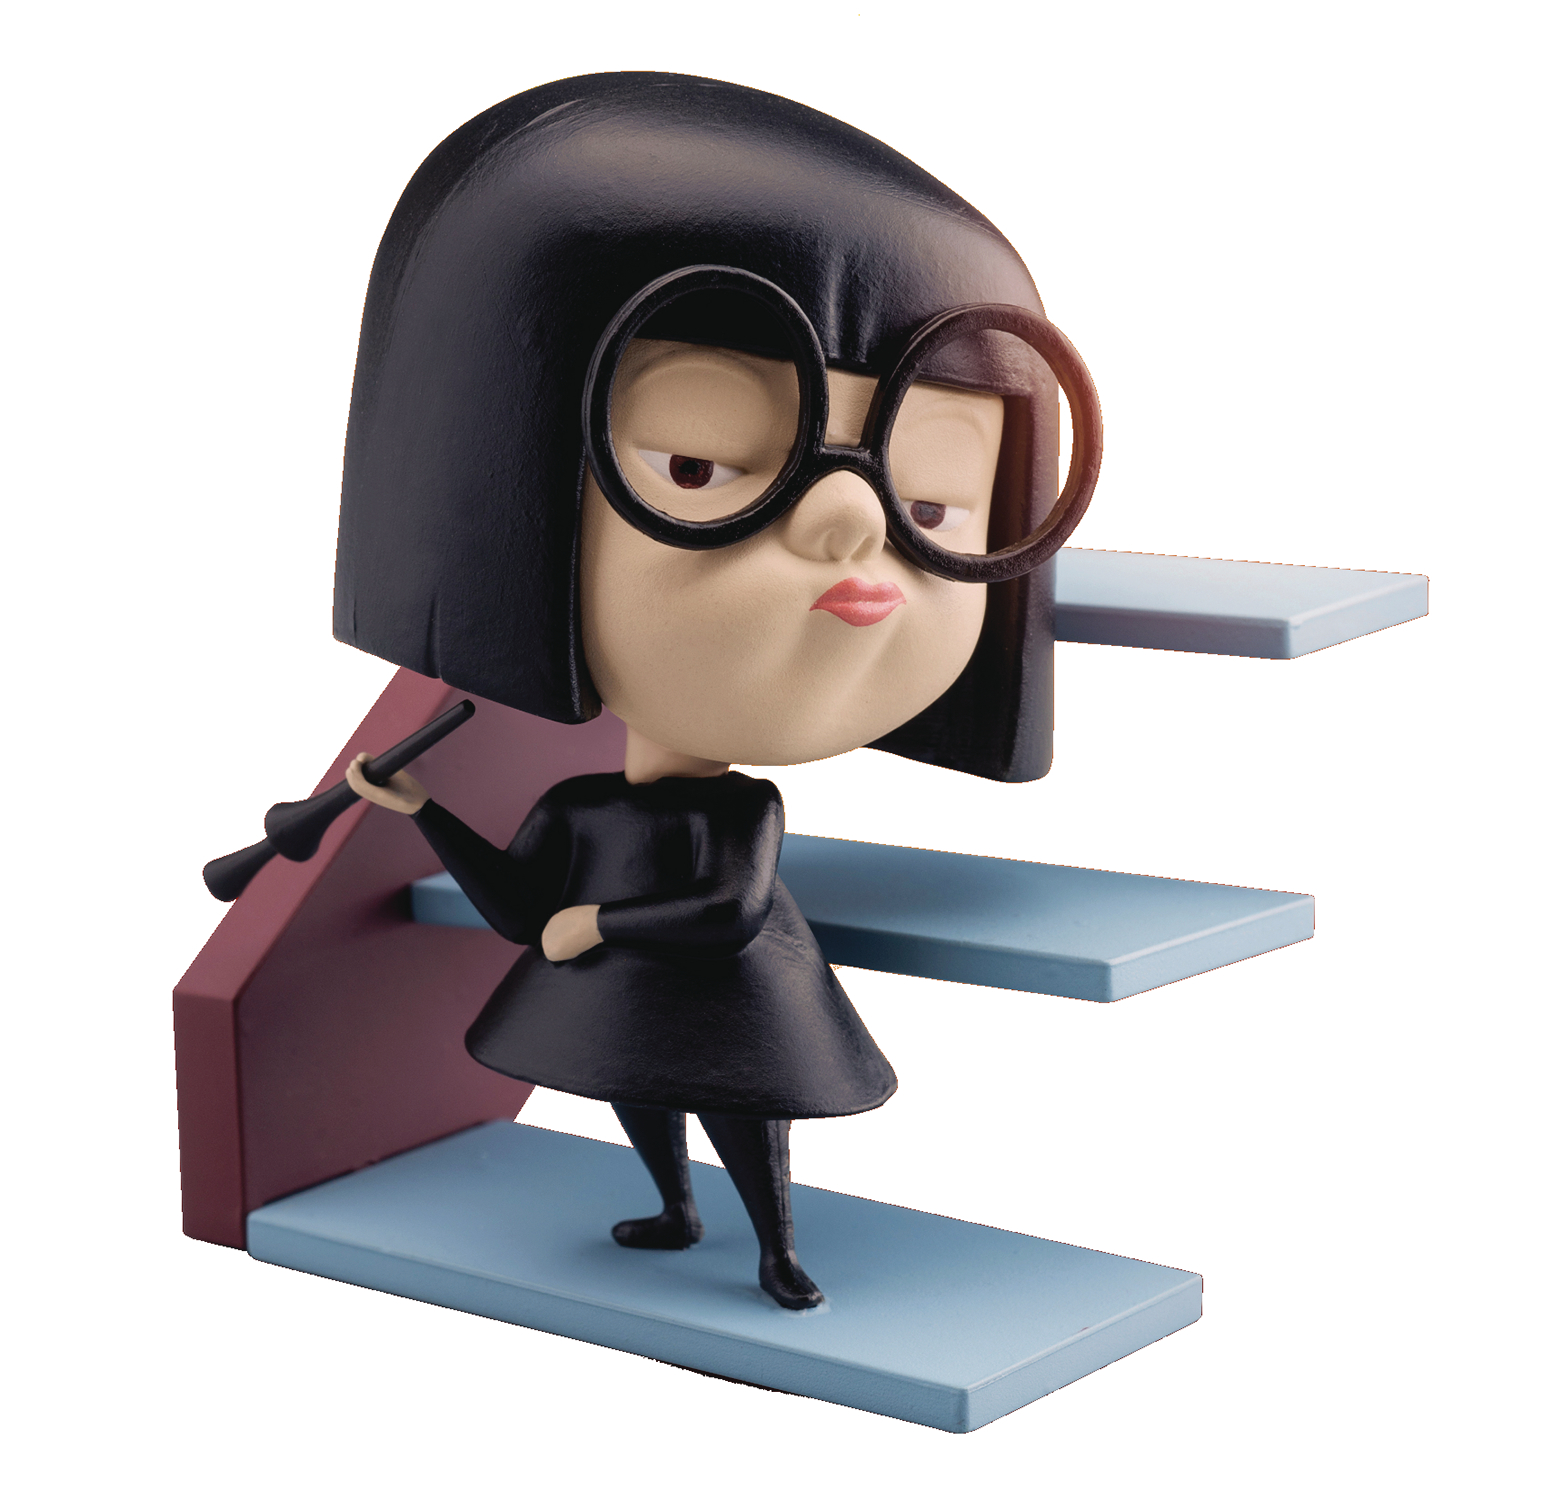 INCREDIBLES MEA-005 EDNA MODE PX FIG (OCT188179)